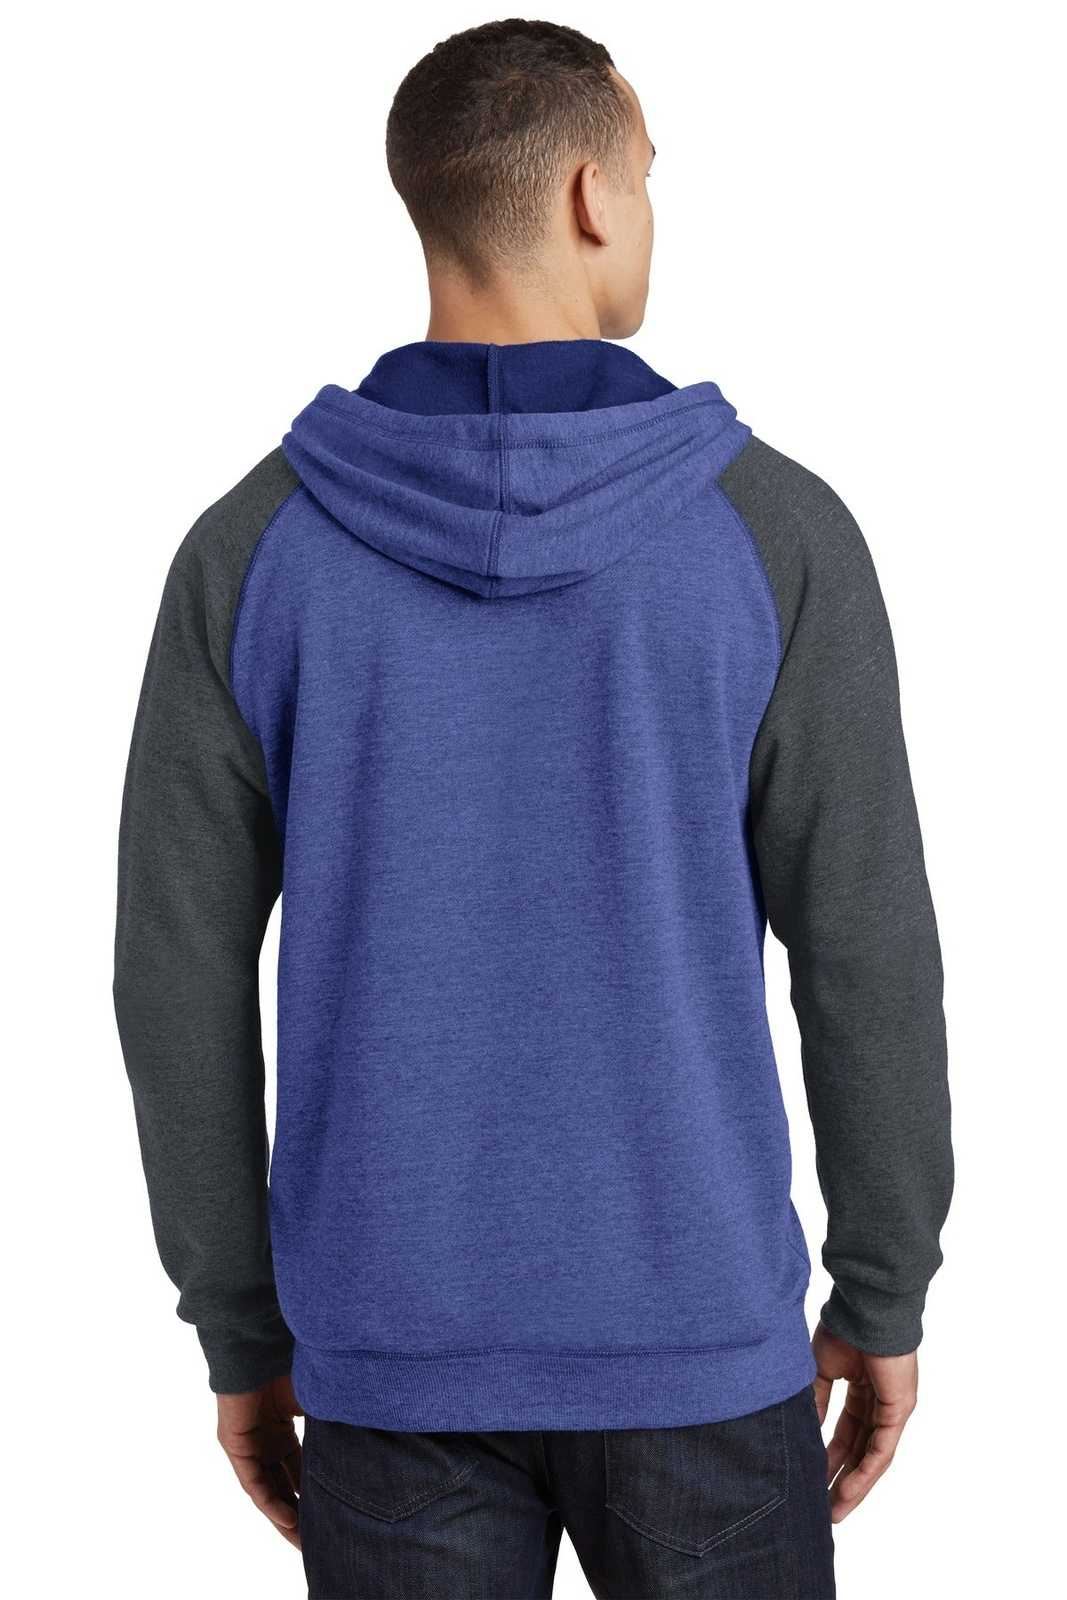 District DT196 Young Mens Lightweight Fleece Raglan Hoodie - Heathered Deep Royal Heathered Charcoal - HIT a Double - 2